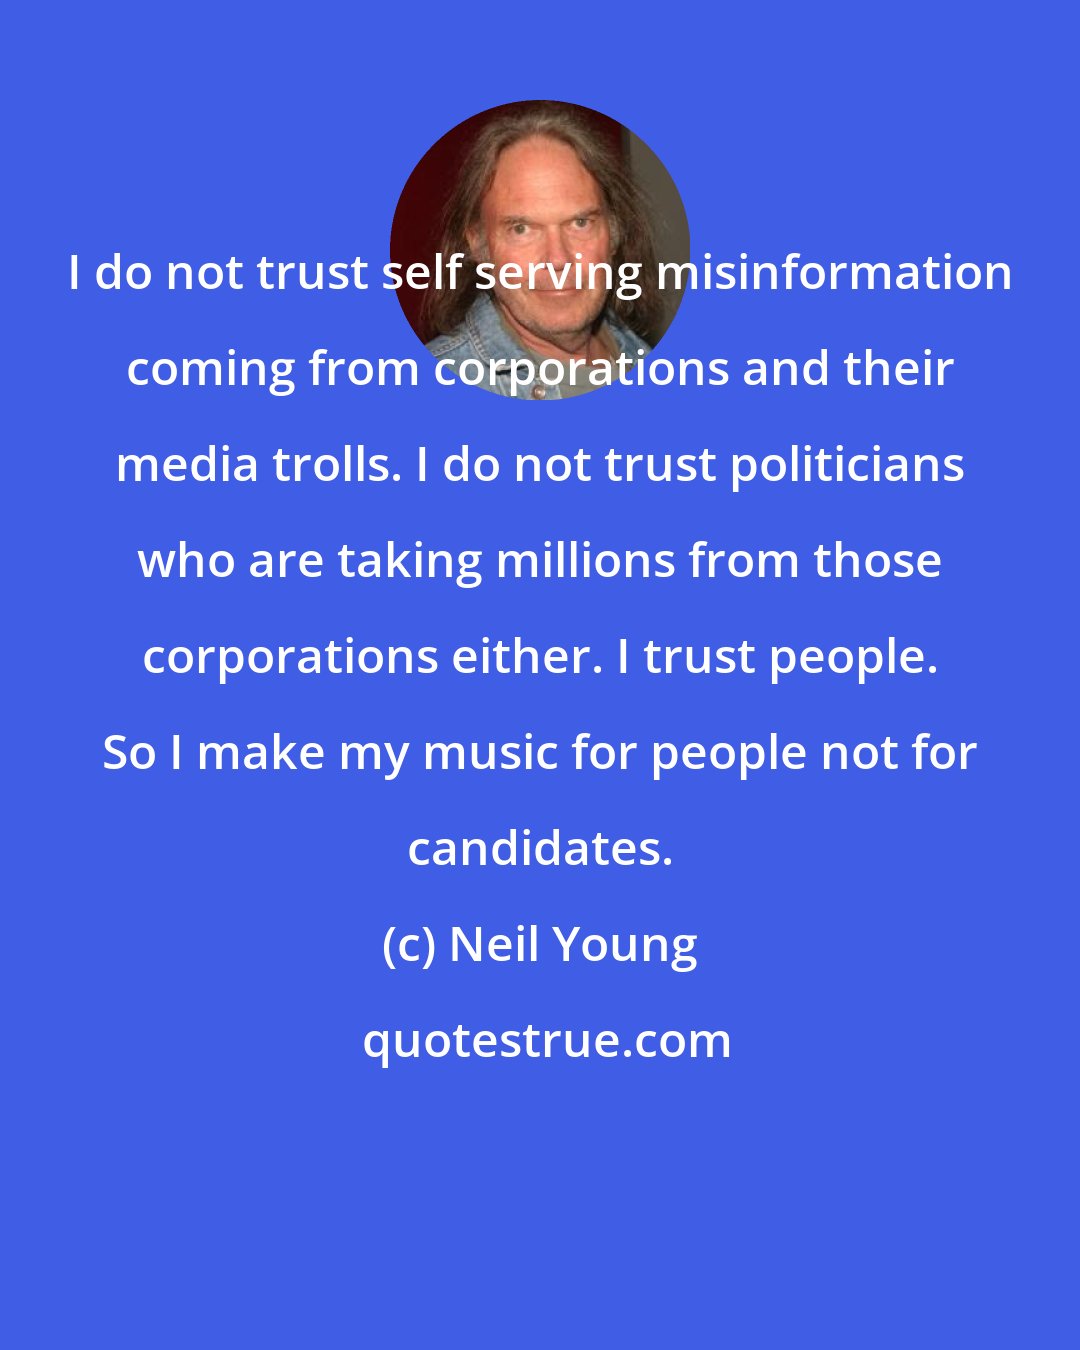 Neil Young: I do not trust self serving misinformation coming from corporations and their media trolls. I do not trust politicians who are taking millions from those corporations either. I trust people. So I make my music for people not for candidates.